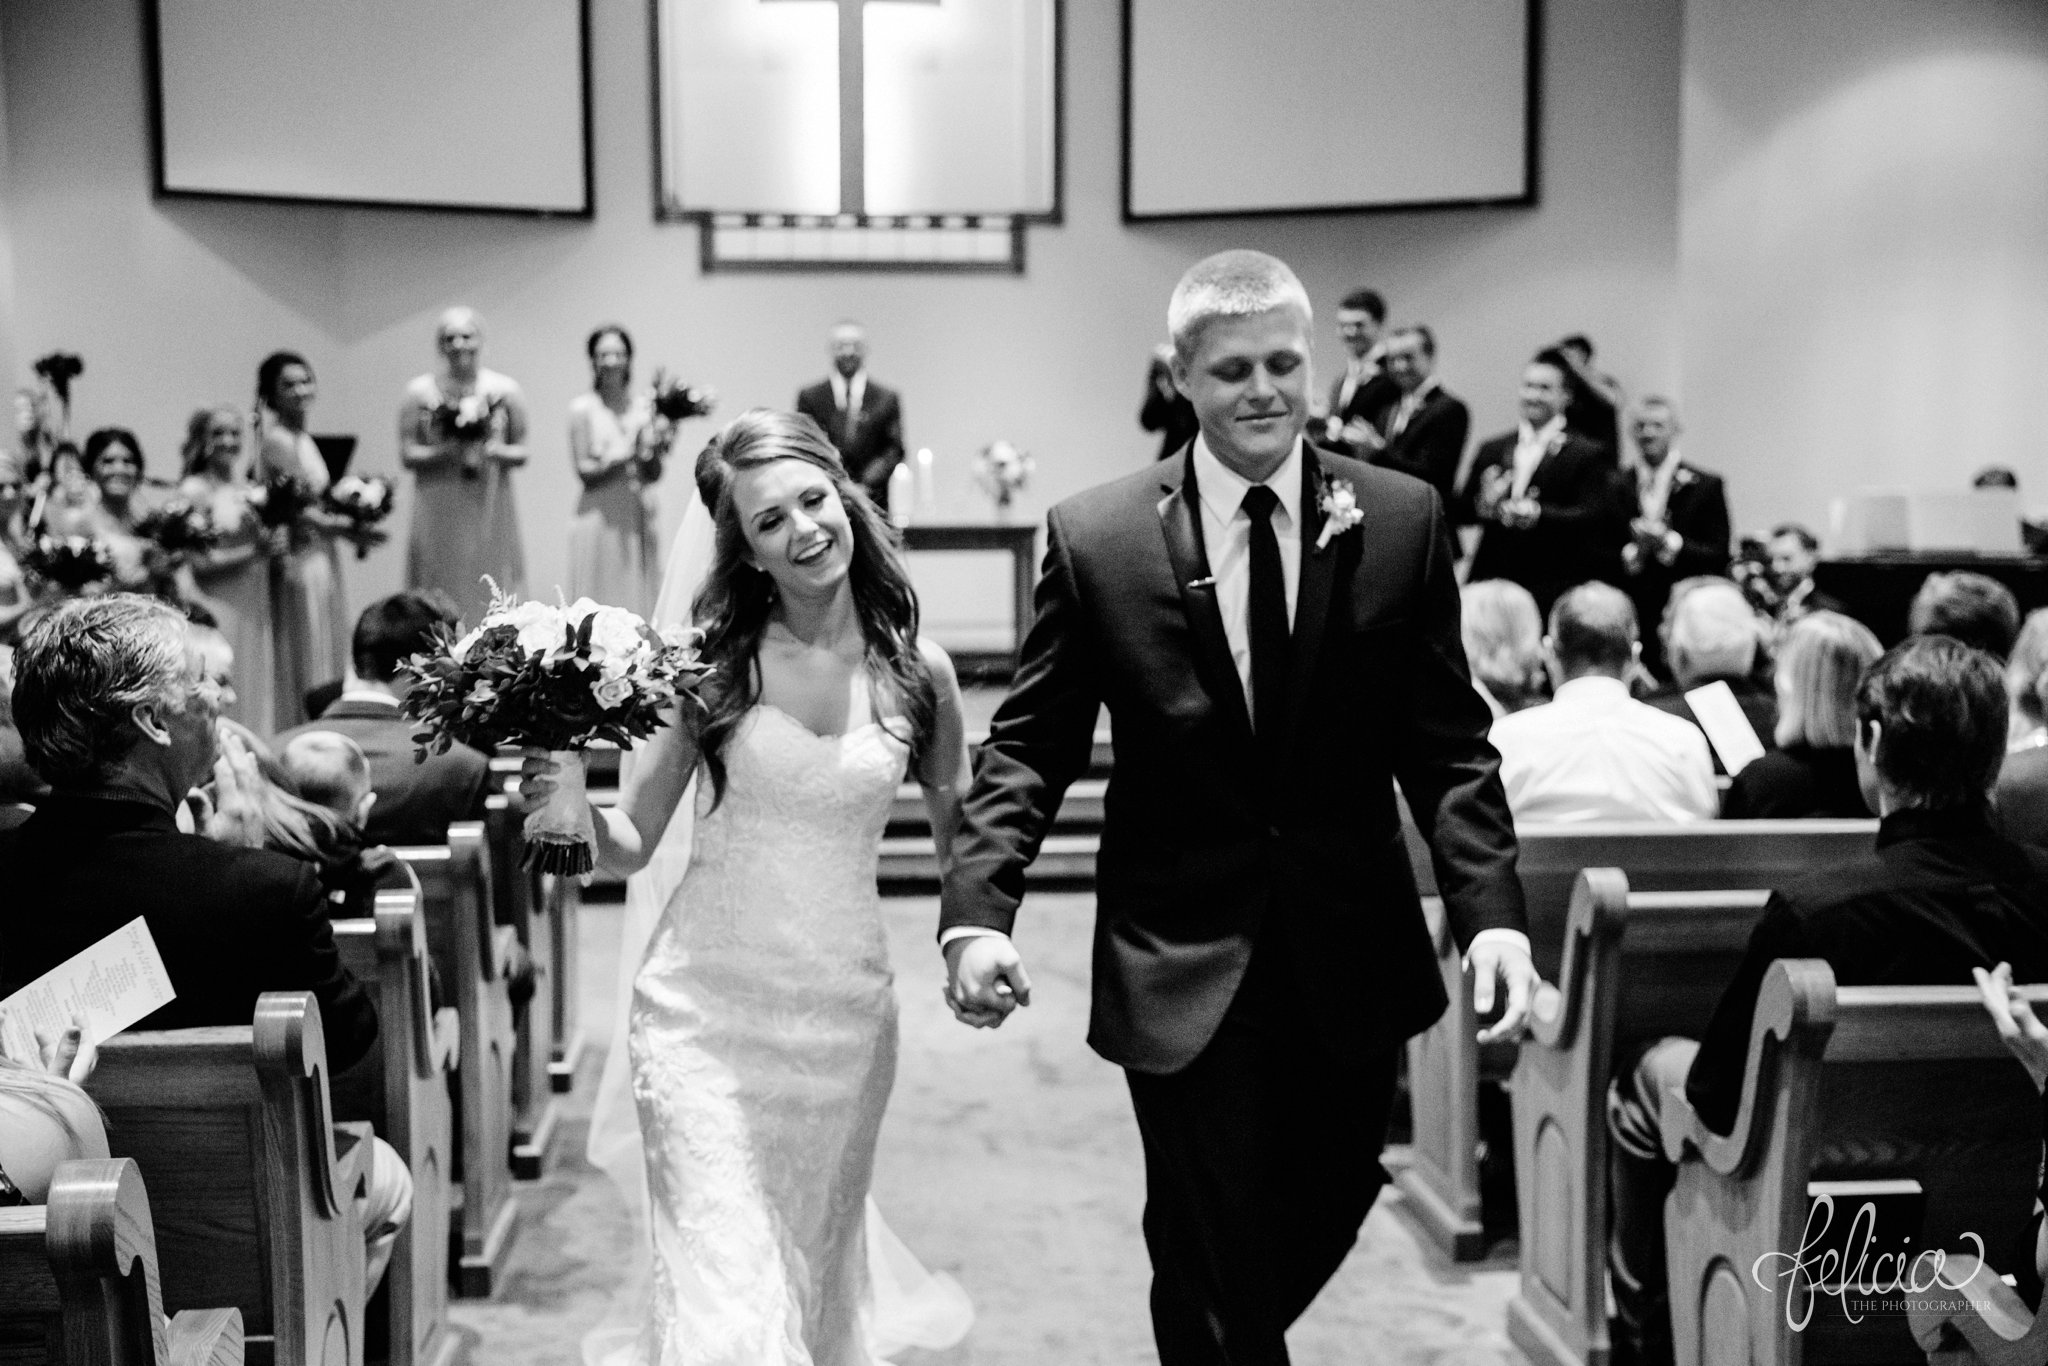 black and white | wedding | wedding photos | industrial | Rumely Event Space | wedding photography | images by feliciathephotographer.com | West Bottoms | wedding ceremony | The Providence Baptist Church | bride and groom | Mr. and Mrs. | walking down the aisle 